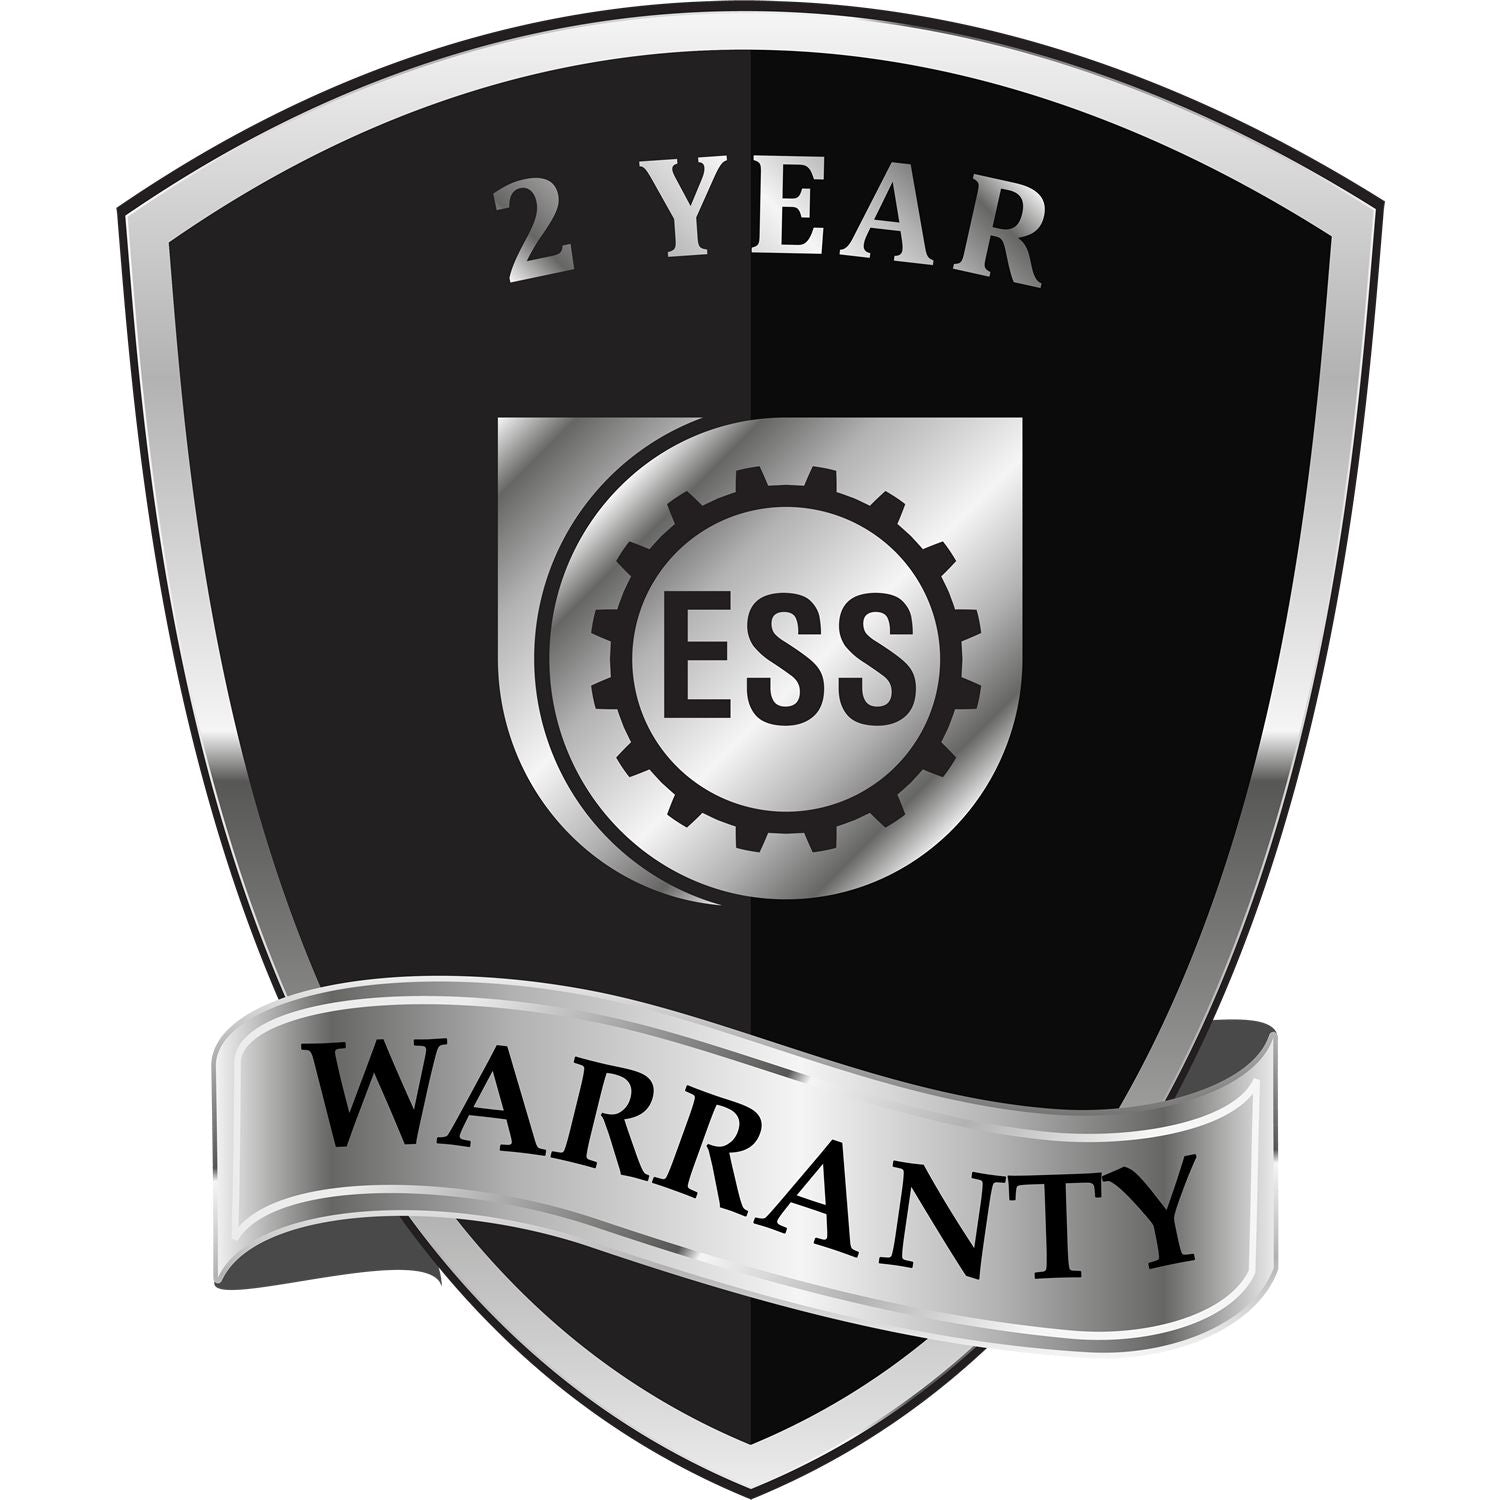 A badge or emblem showing a warranty icon for the Wisconsin Engineer Desk Seal